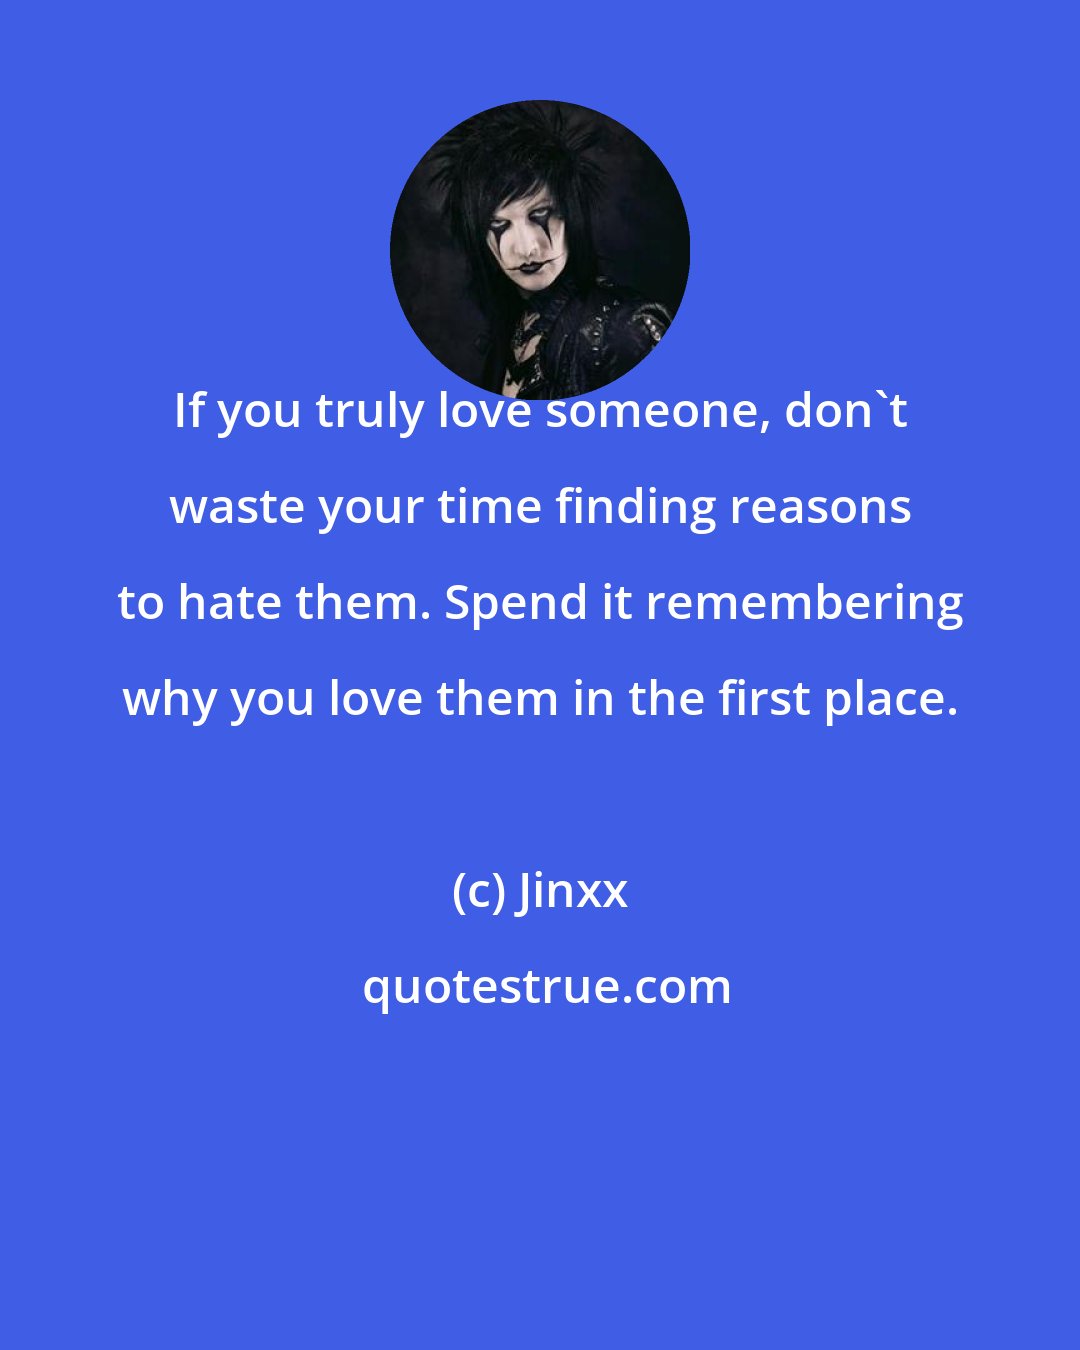 Jinxx: If you truly love someone, don't waste your time finding reasons to hate them. Spend it remembering why you love them in the first place.